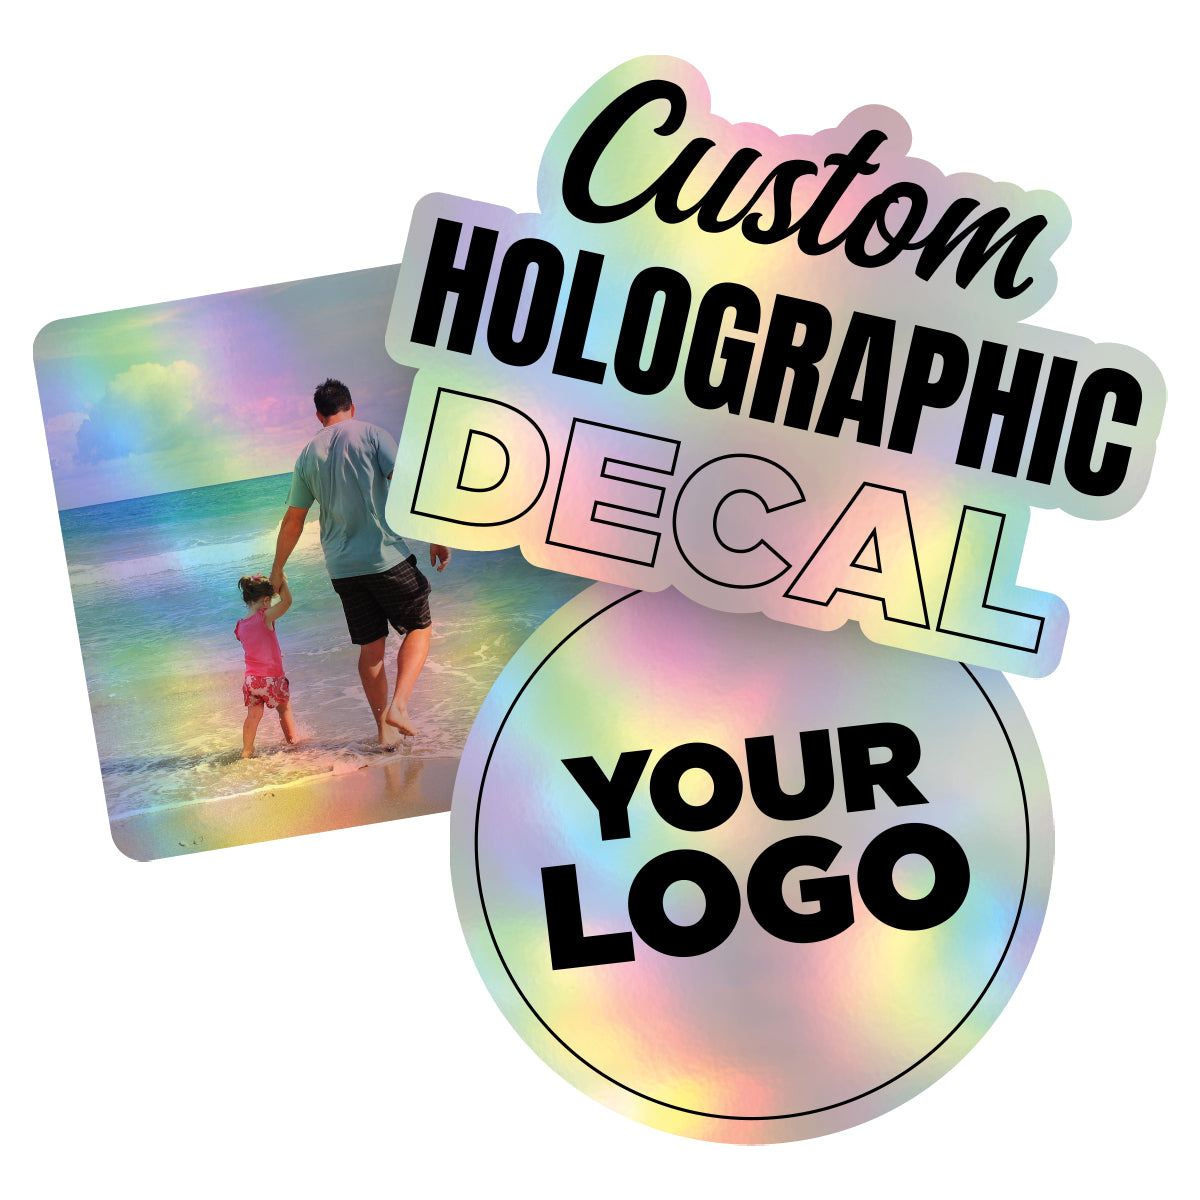 Personalized Holographic Vinyl Sticker Decal Custom Made Any Logo, Image, Text, Or Name Die Cut To Shape - 25 Pack, 10 Inch, Square